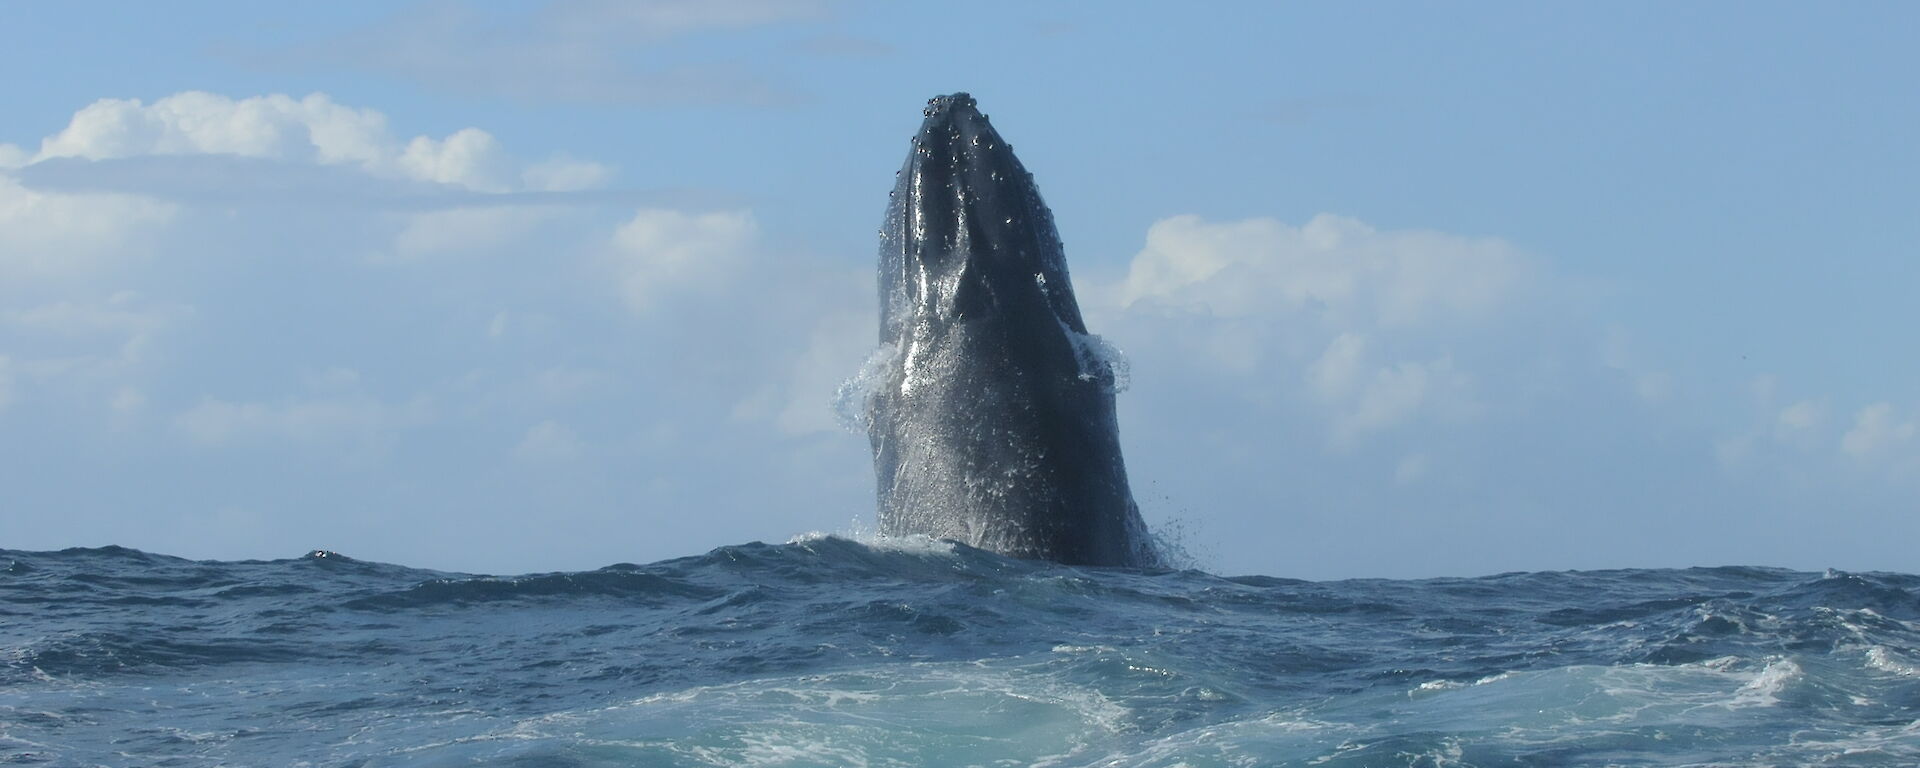 A humpback whale points its upper body straight up out of the ocean in a behaviour known as spyhopping